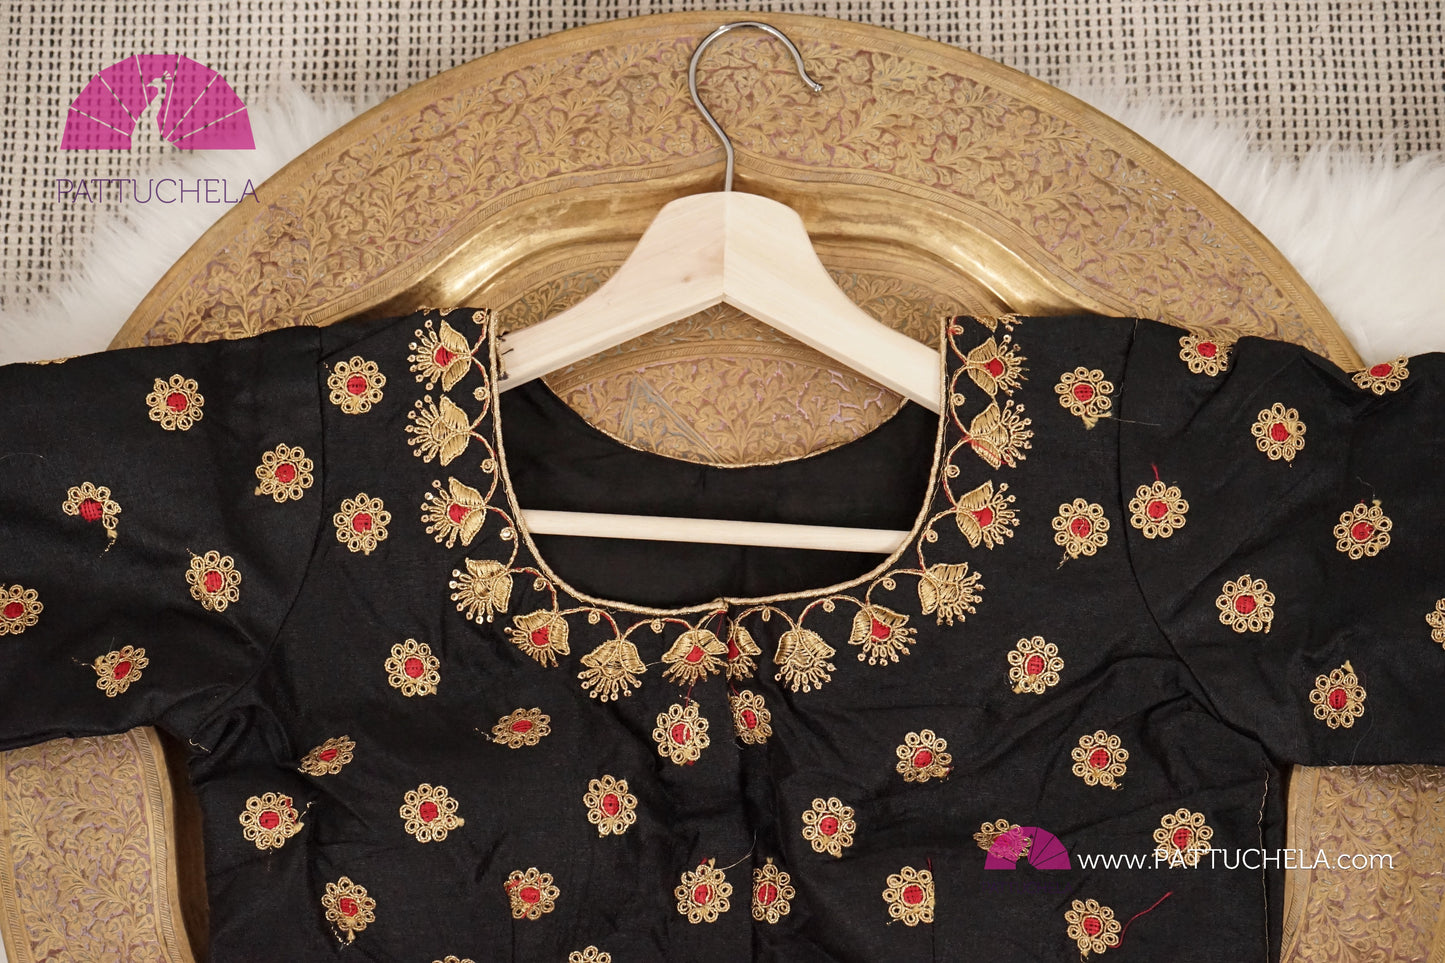 Beautiful Designer Black Stitched Floral Embroidered Blouse for Party, Wedding, Festivals & Occasions | Ready made Blouse